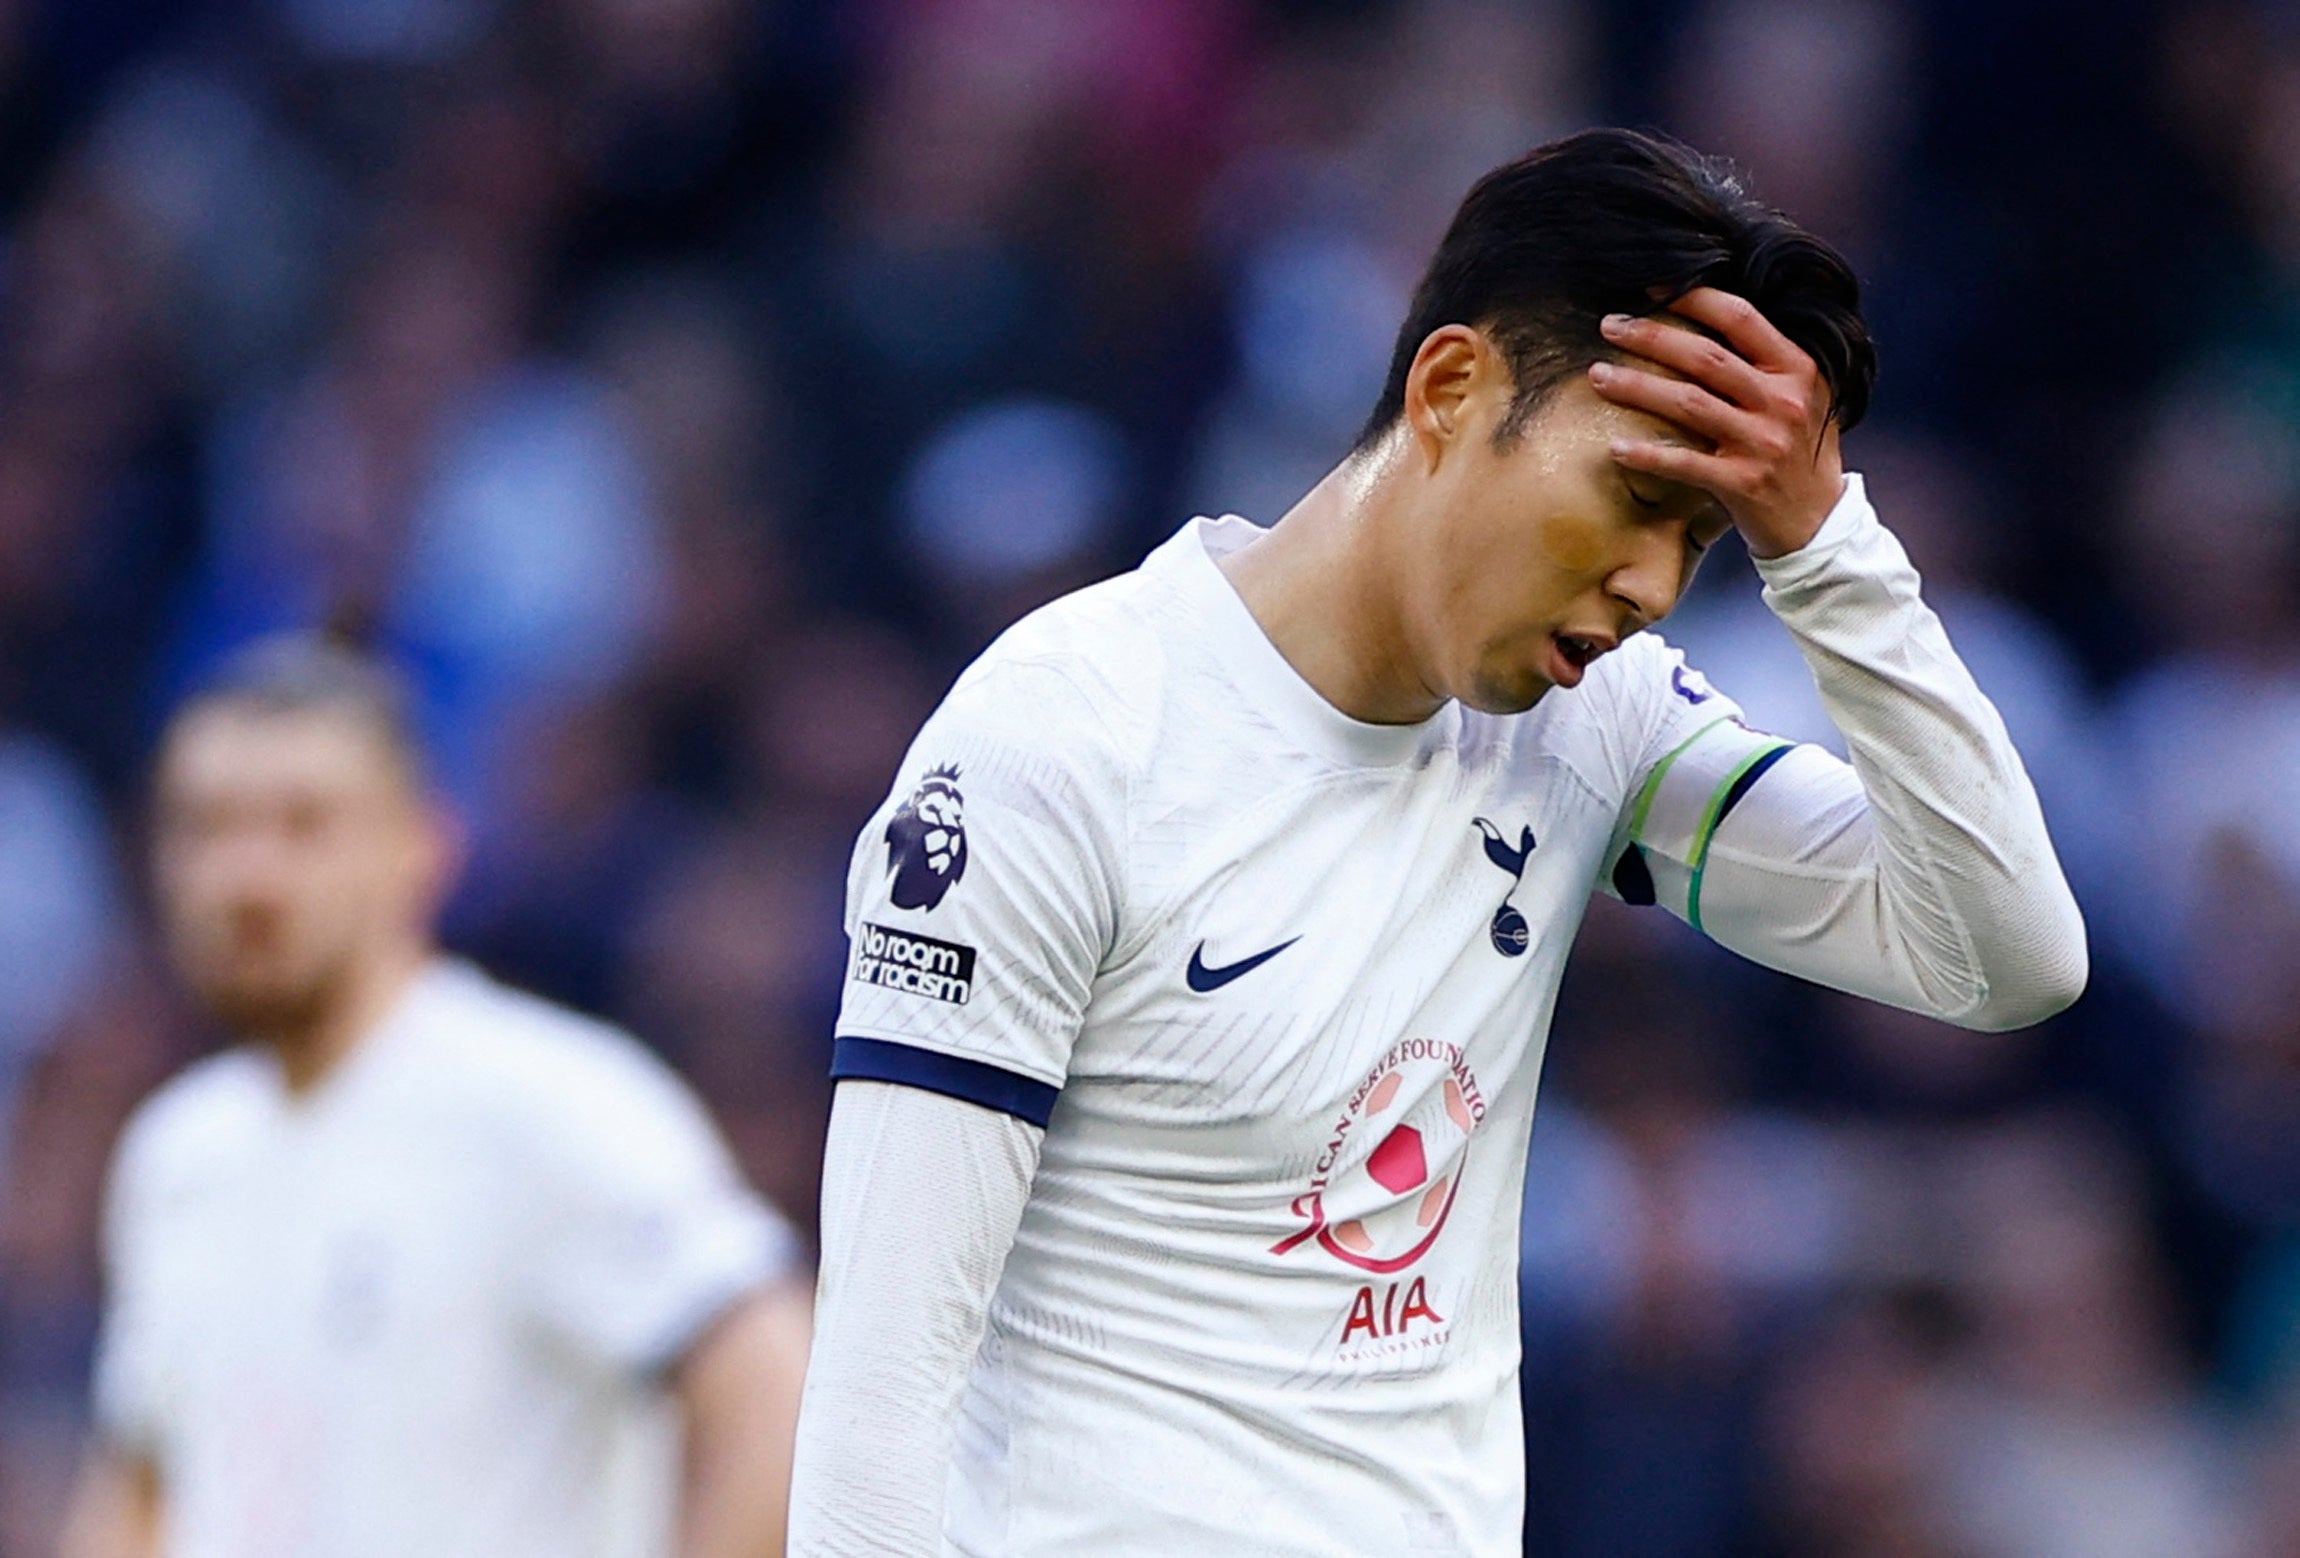 Son Heung-min reacts after a huge missed chance in the first half